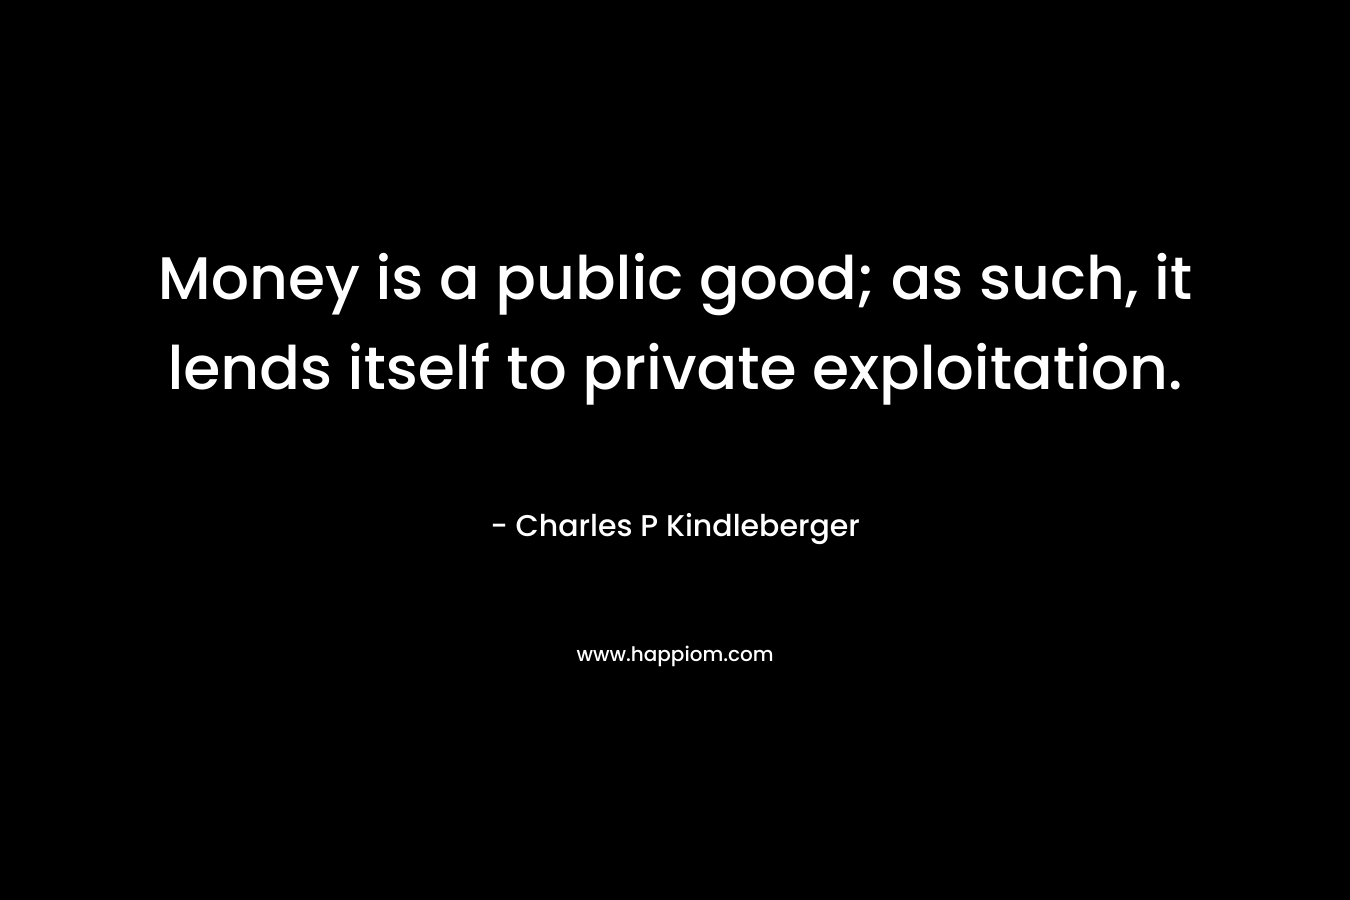 Money is a public good; as such, it lends itself to private exploitation. – Charles P Kindleberger